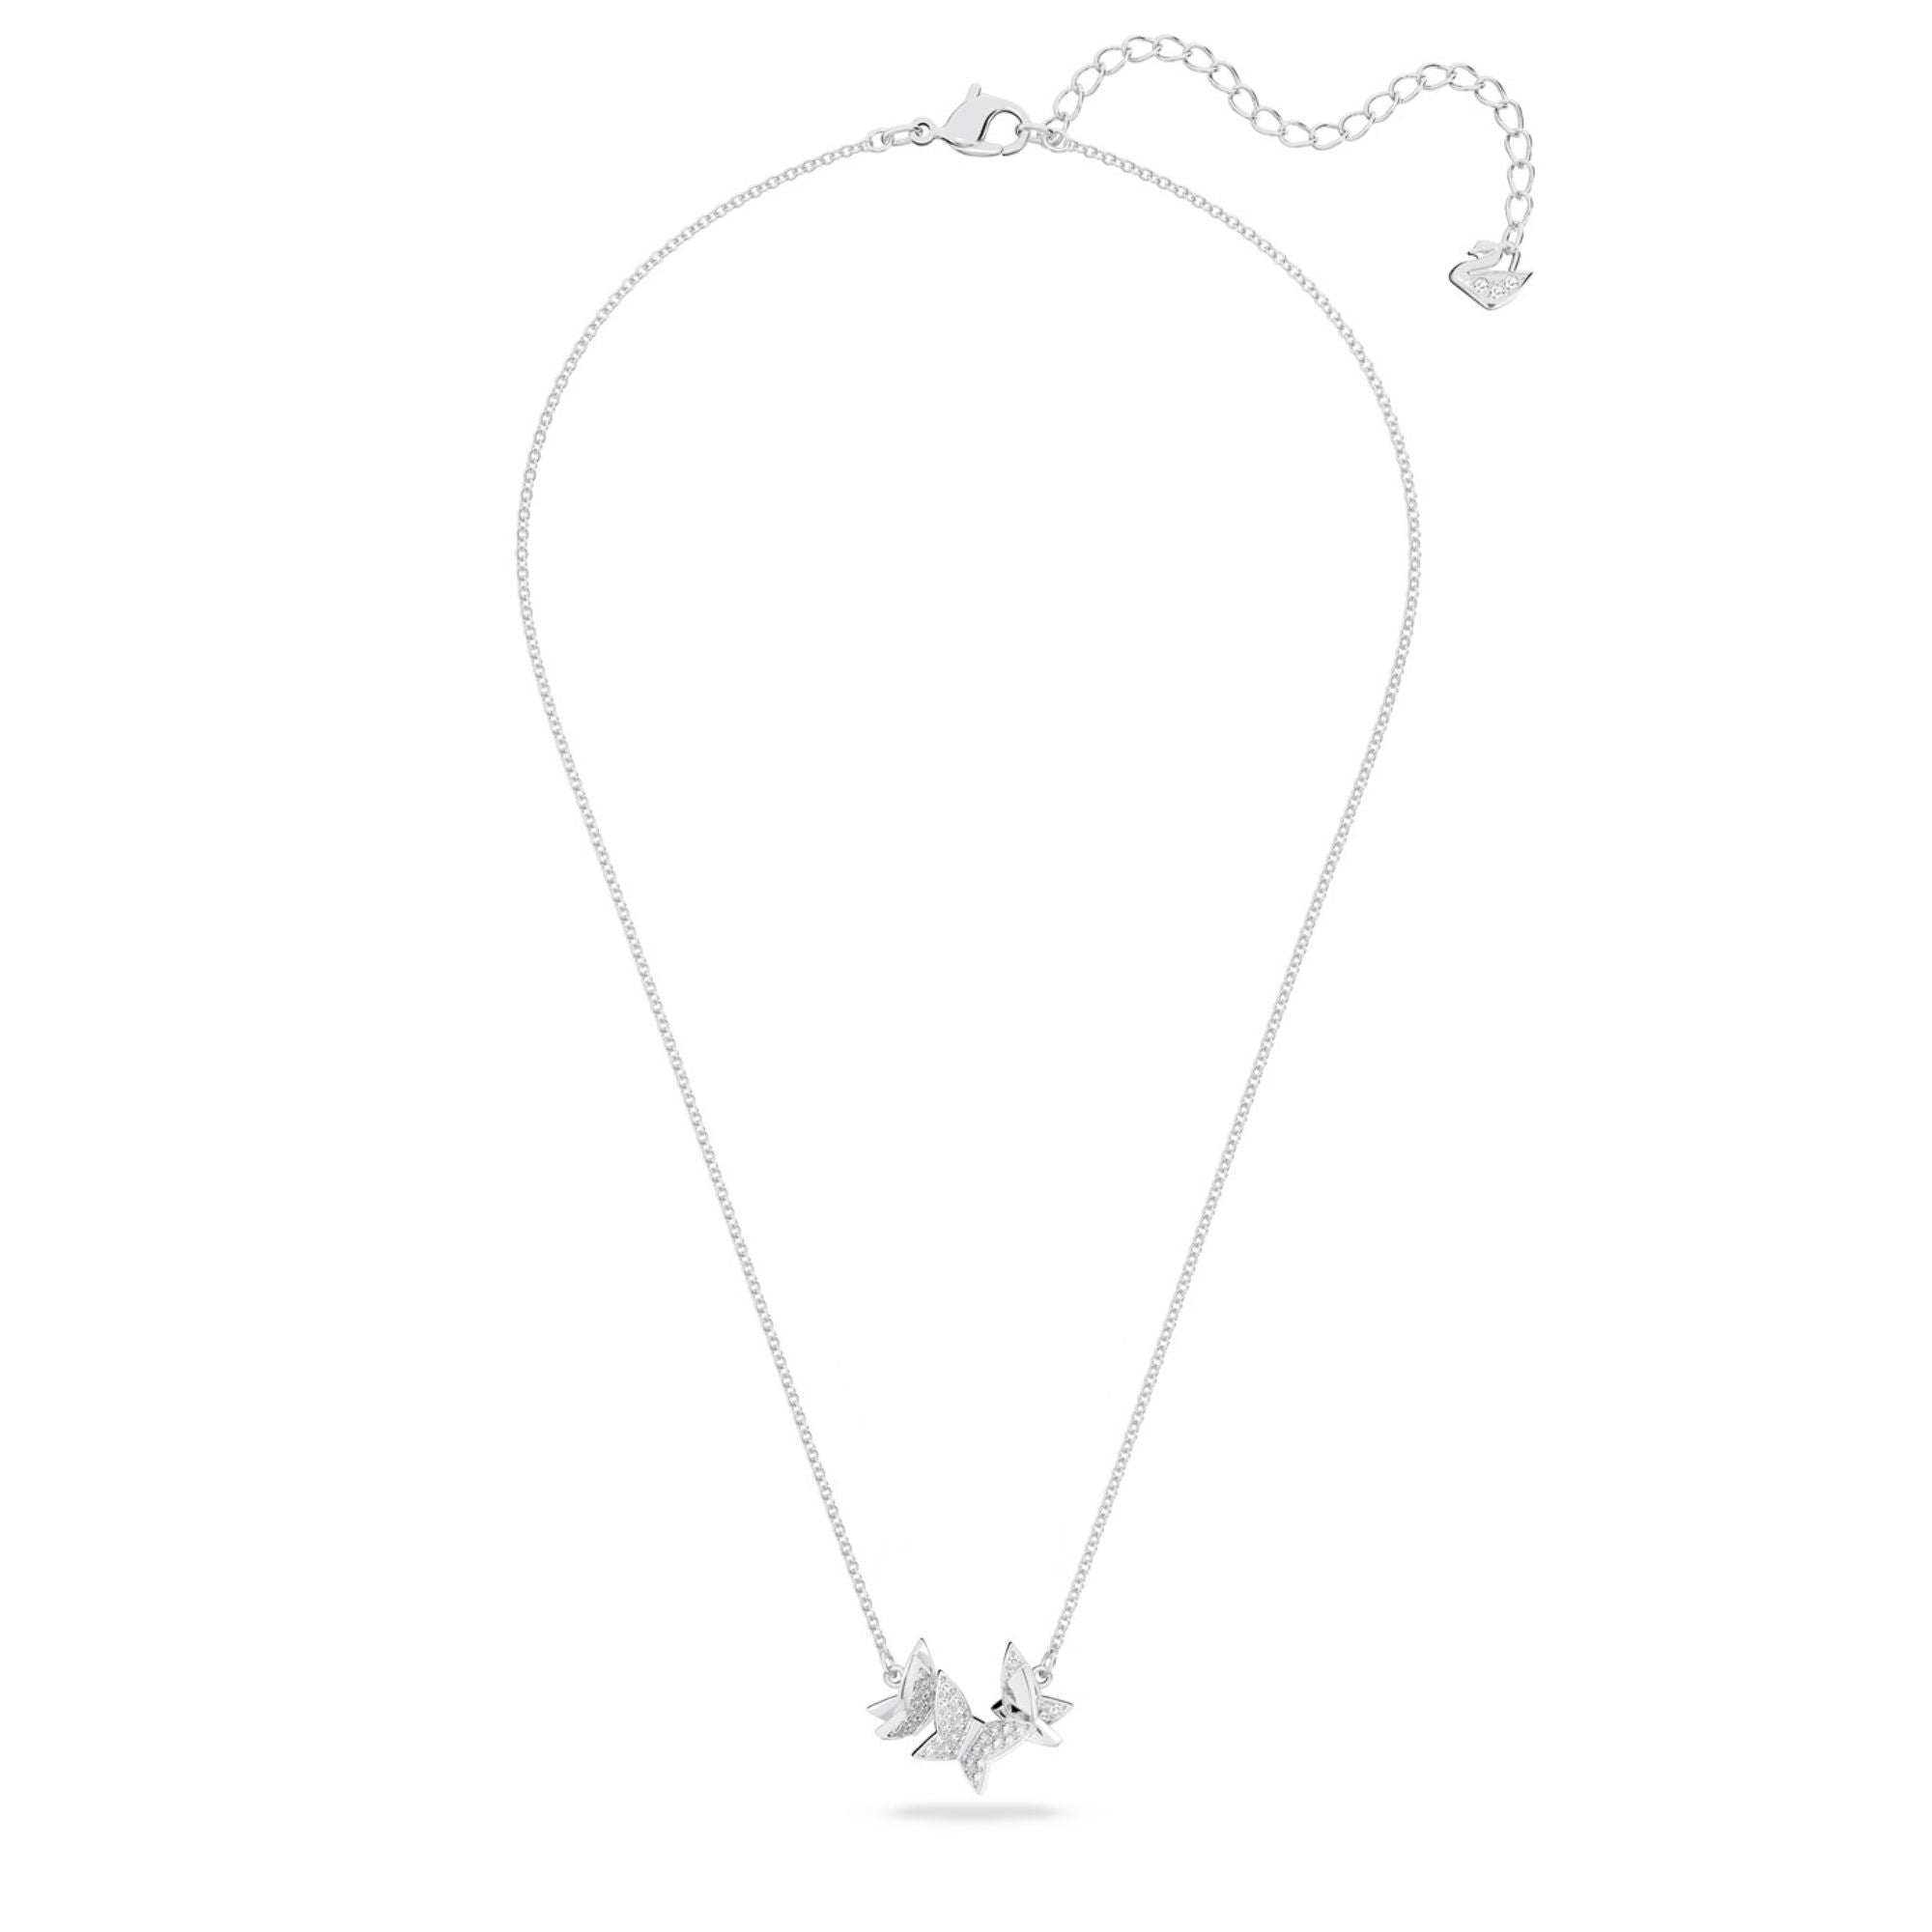 Swarovski Lilia Necklace, Butterfly, White, Rose Gold-Tone Plated